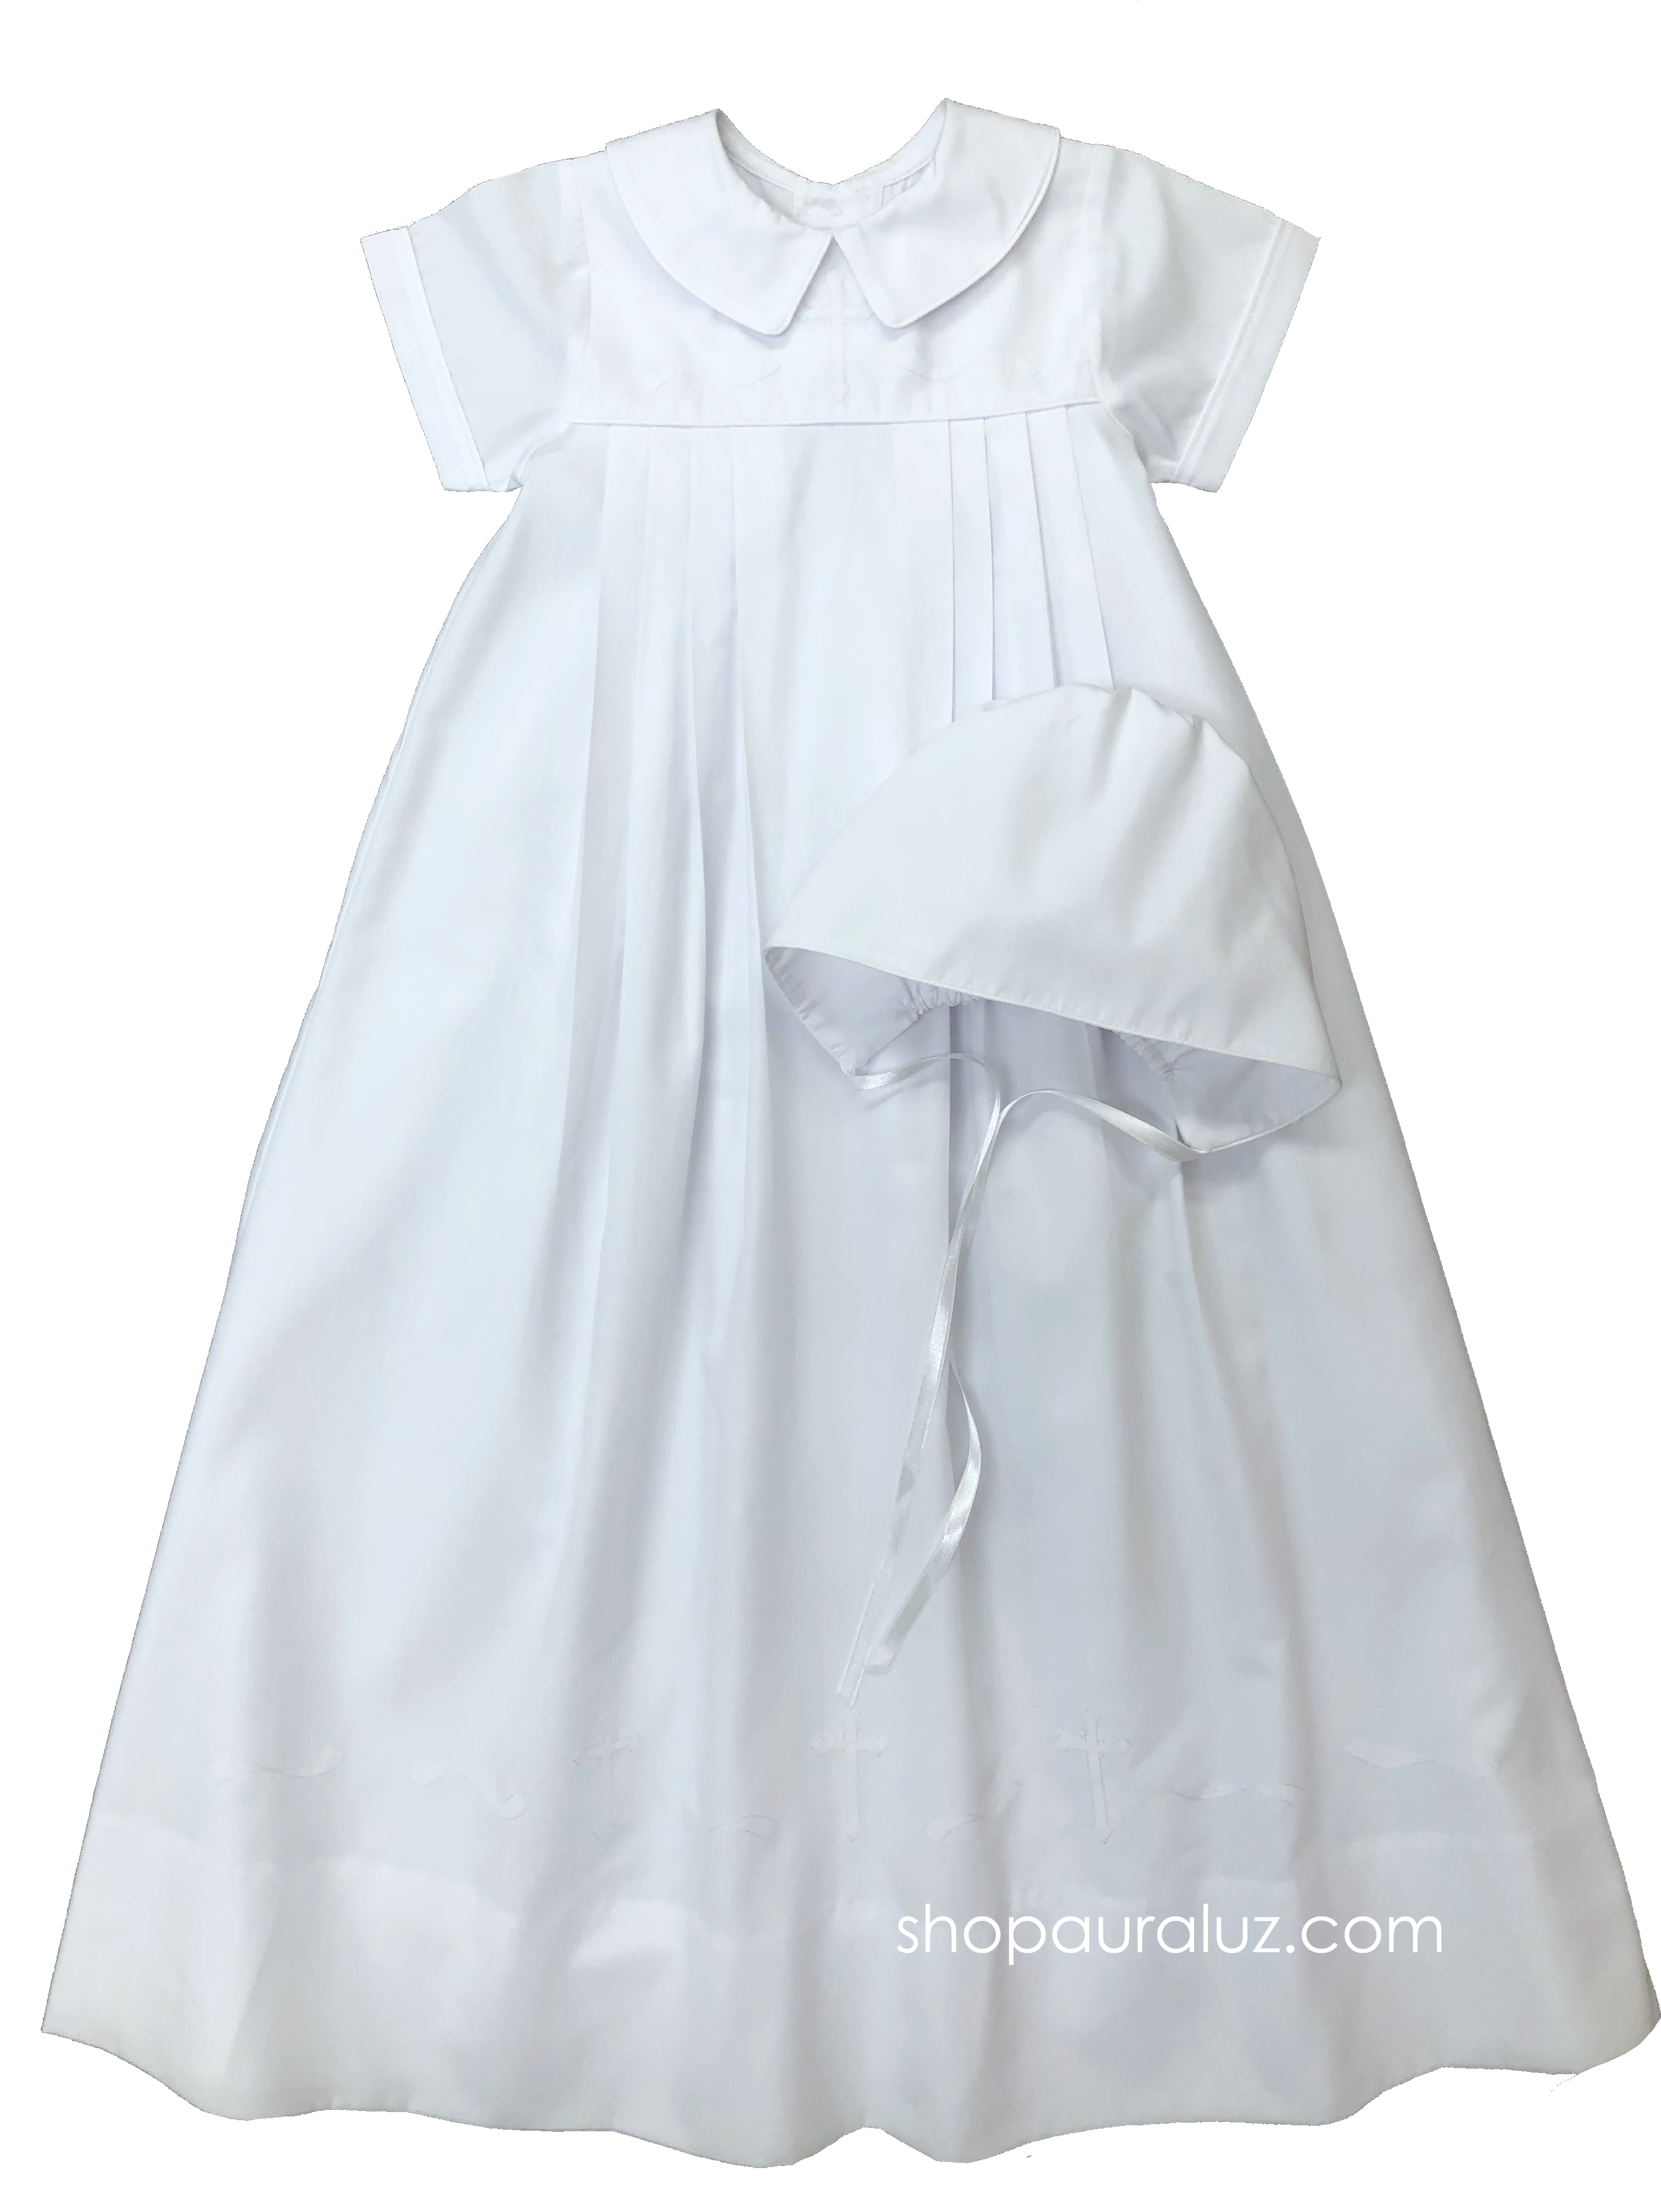 Auraluz Christening Gown/Slip/Hat. White with white piping trim and cross ribbon embroidery